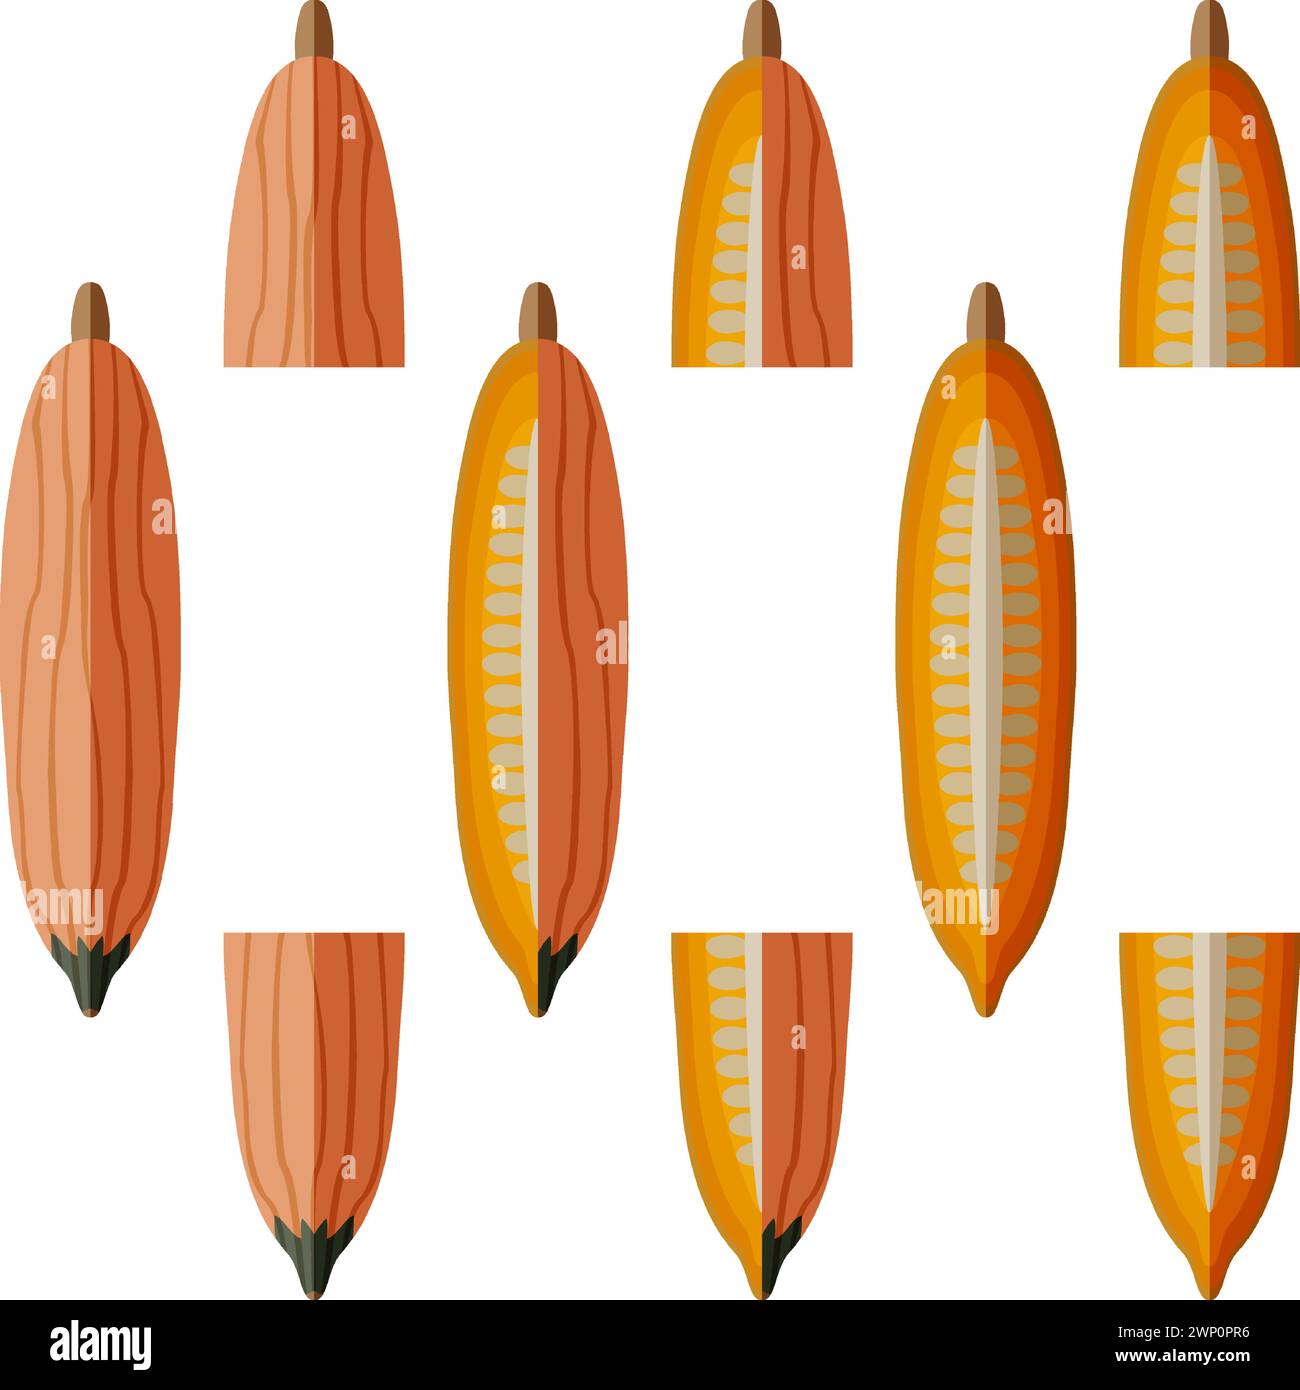 Set of Georgia candy roaster squash. Winter squash. Cucurbita maxima. Fruits and vegetables. Flat style. Isolated vector illustration. Stock Vector